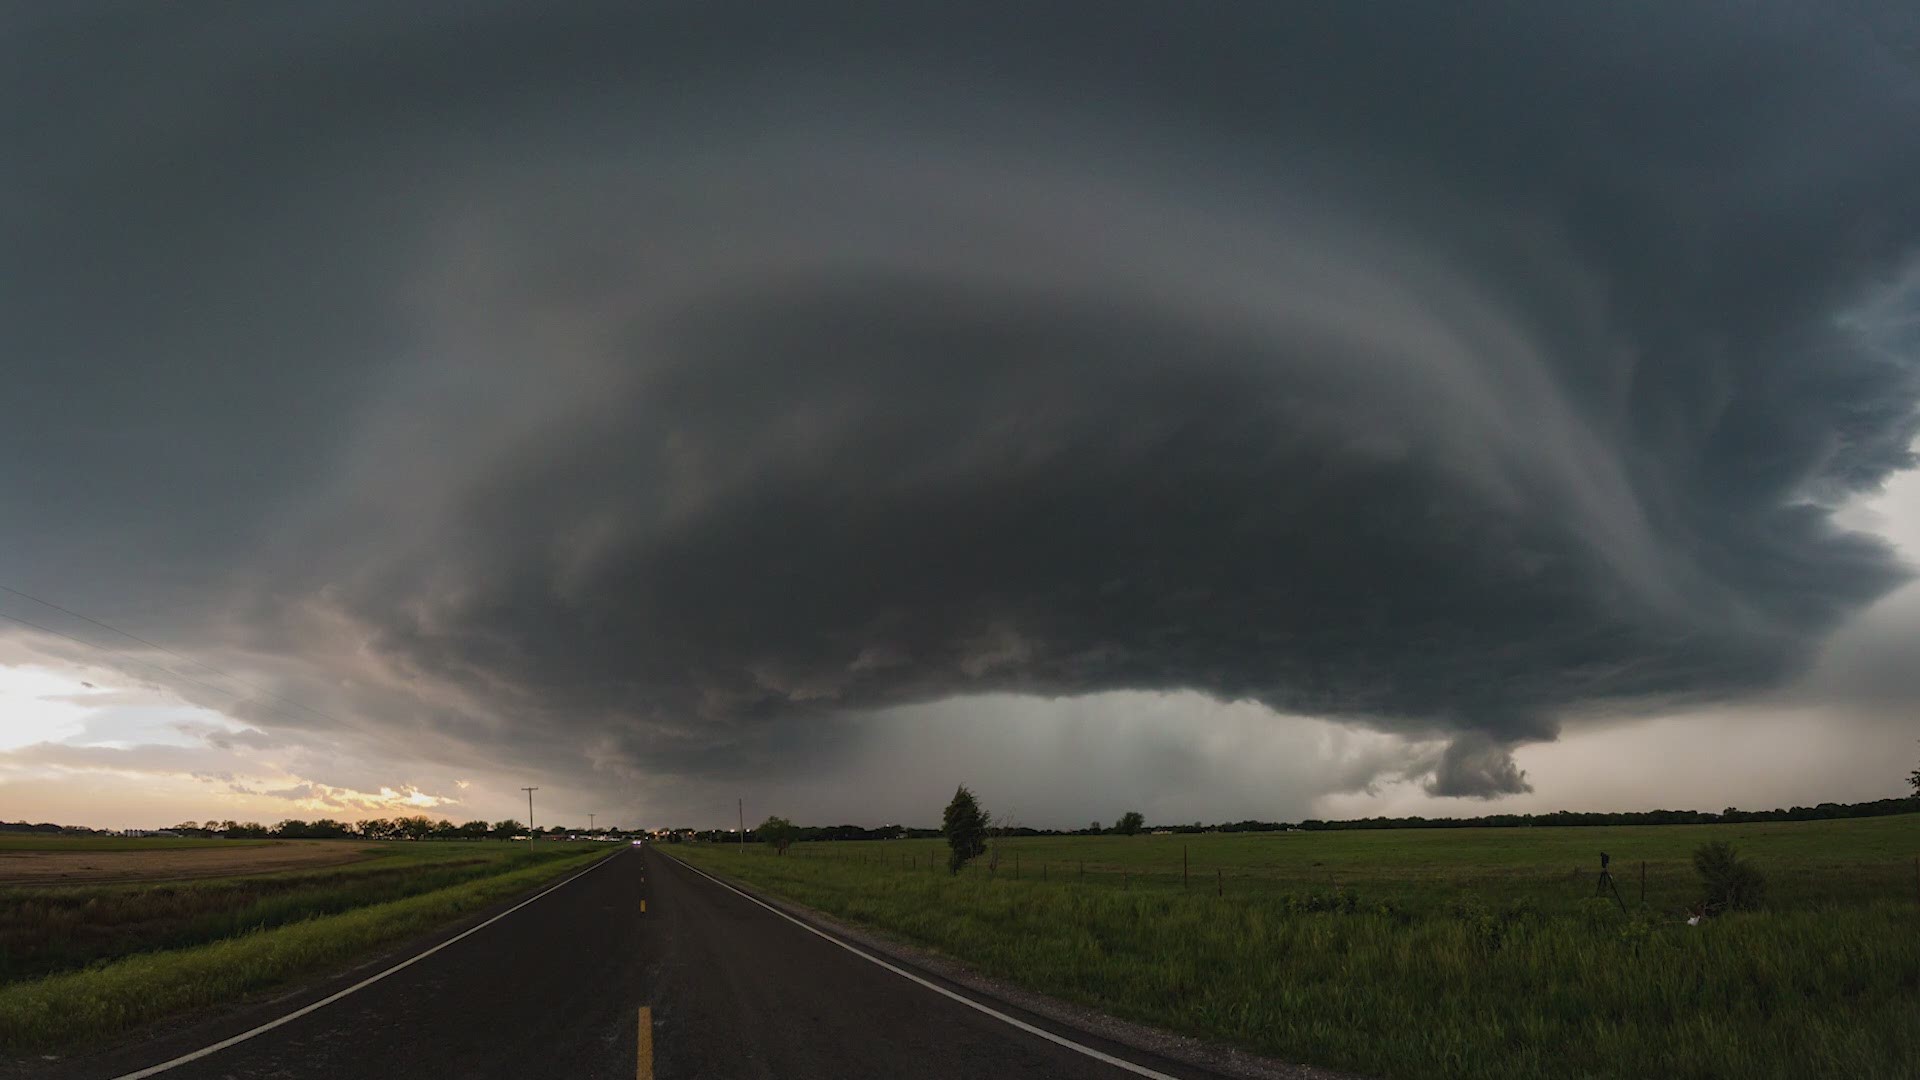 WFAA's Meteorologist Jesse Hawila talks about what it's like to chase dangerous storms in Texas.